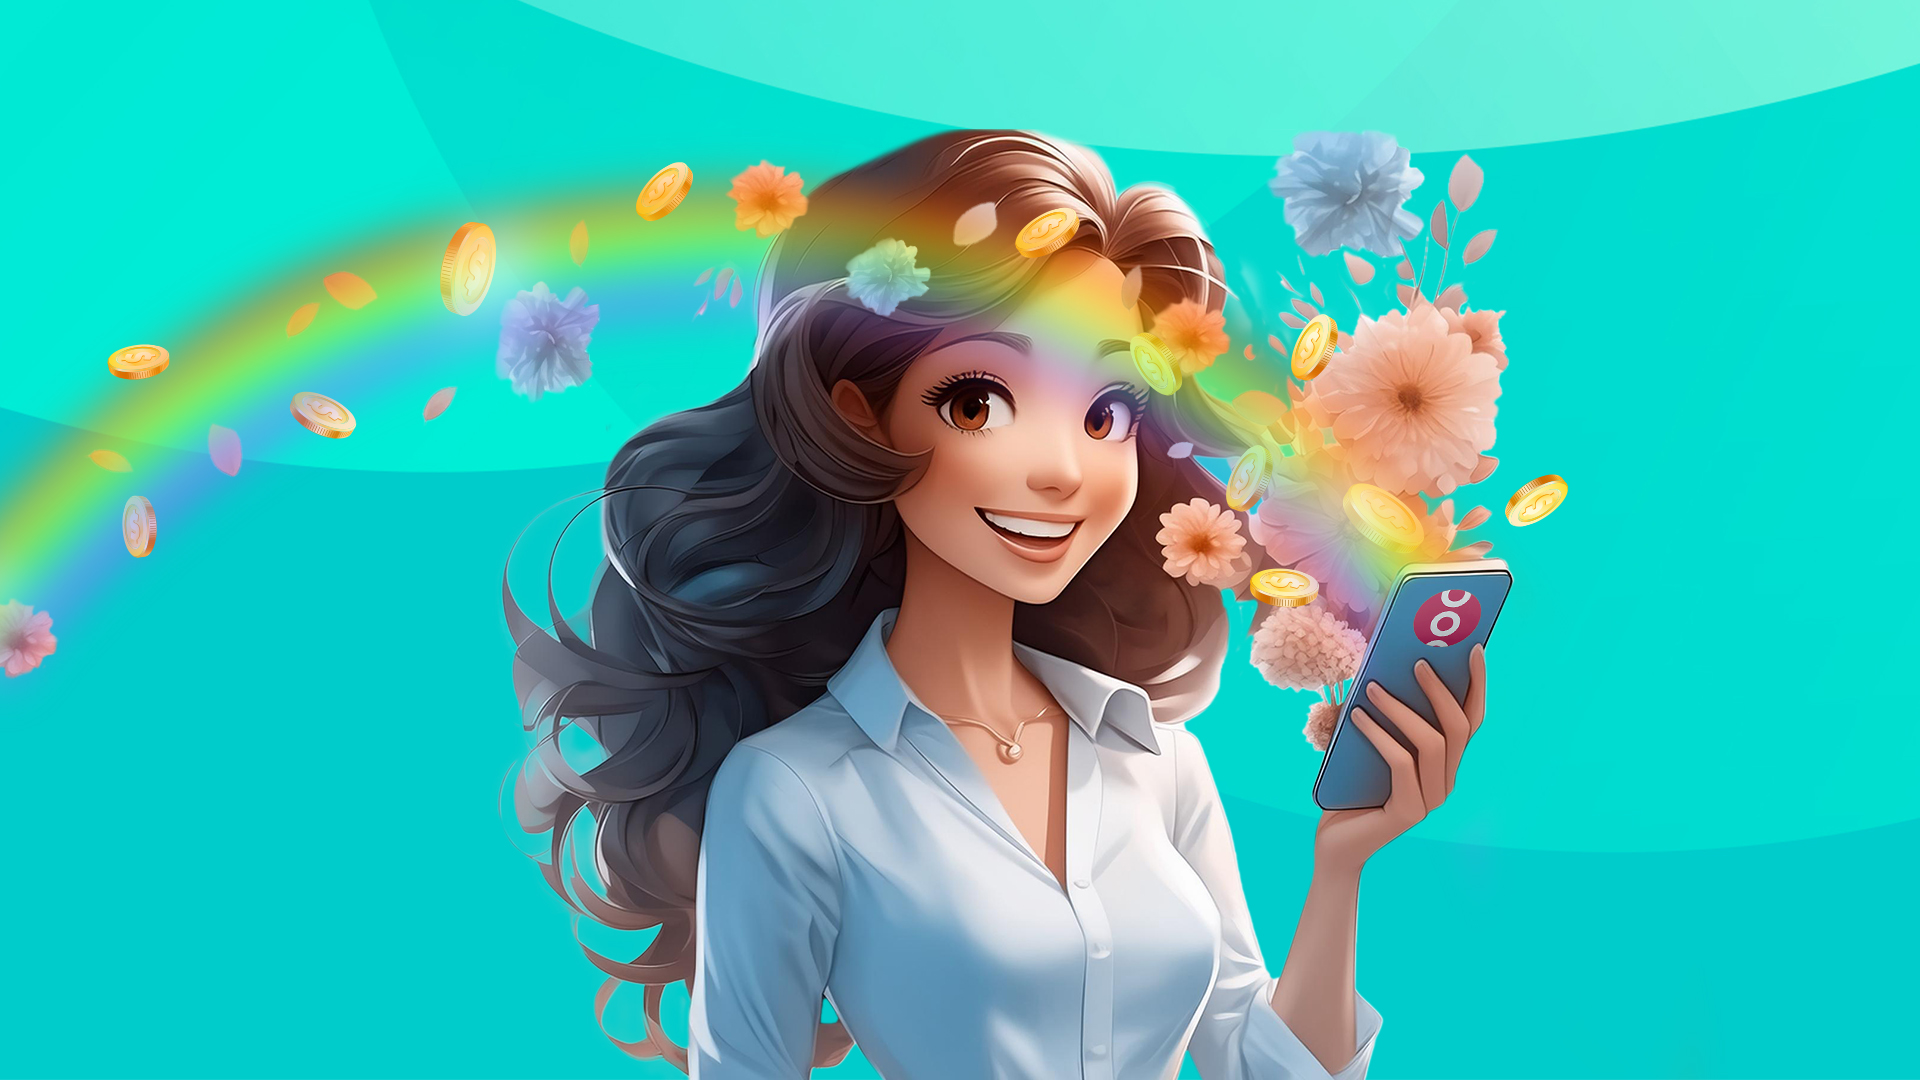 A woman with long brown hair smiles with her phone in her hand and a rainbow surrounded by spring flowers emerges from her phone screen, over a teal background.